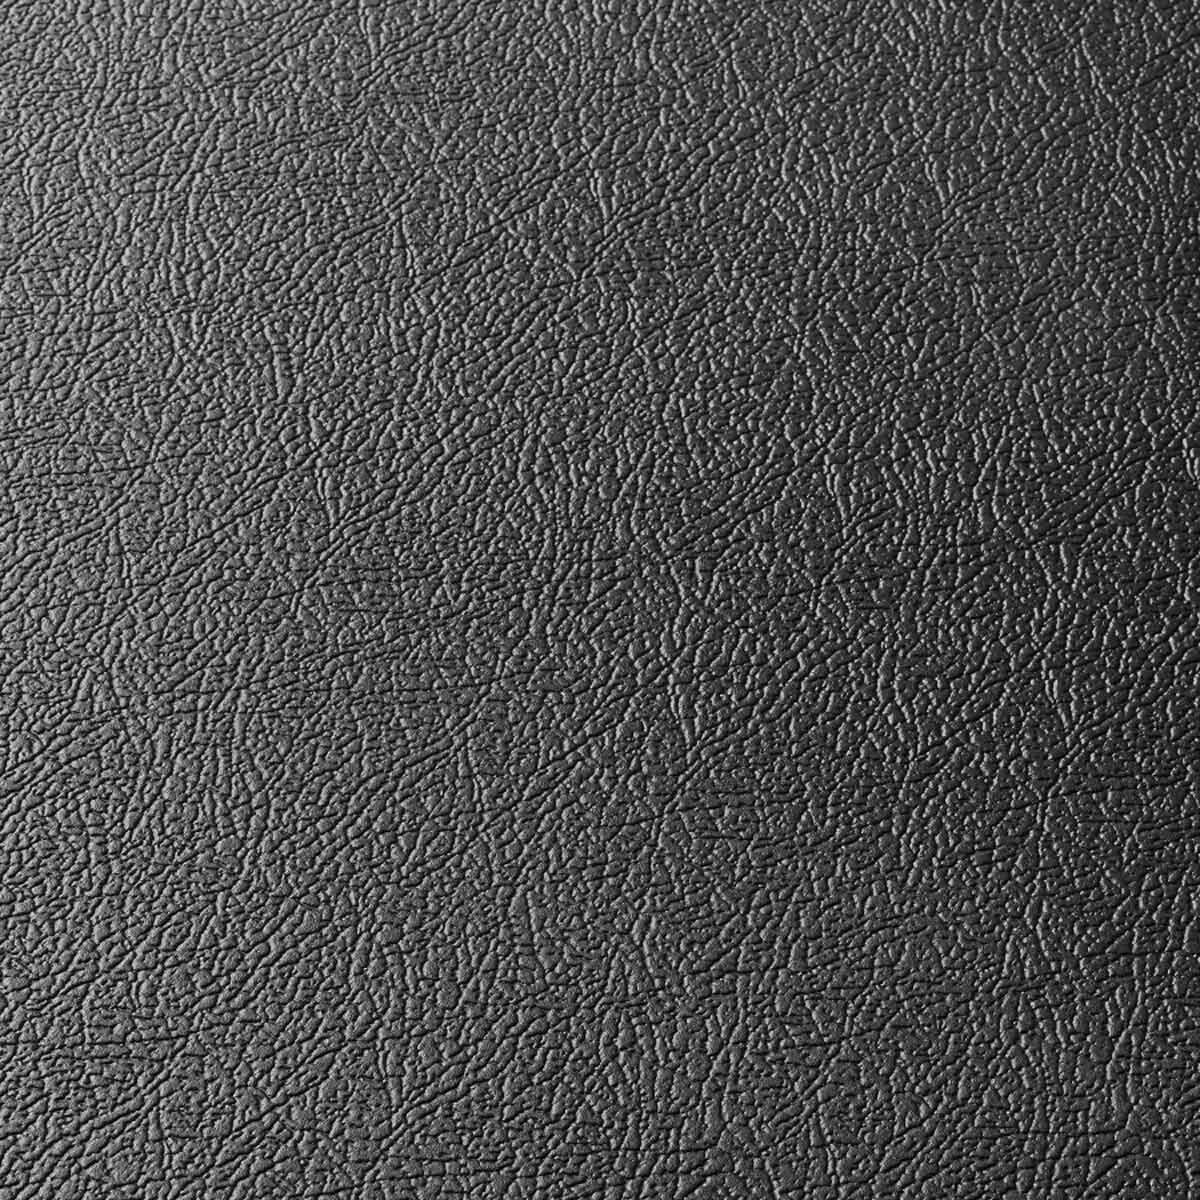 Close up image of graphite tile surface